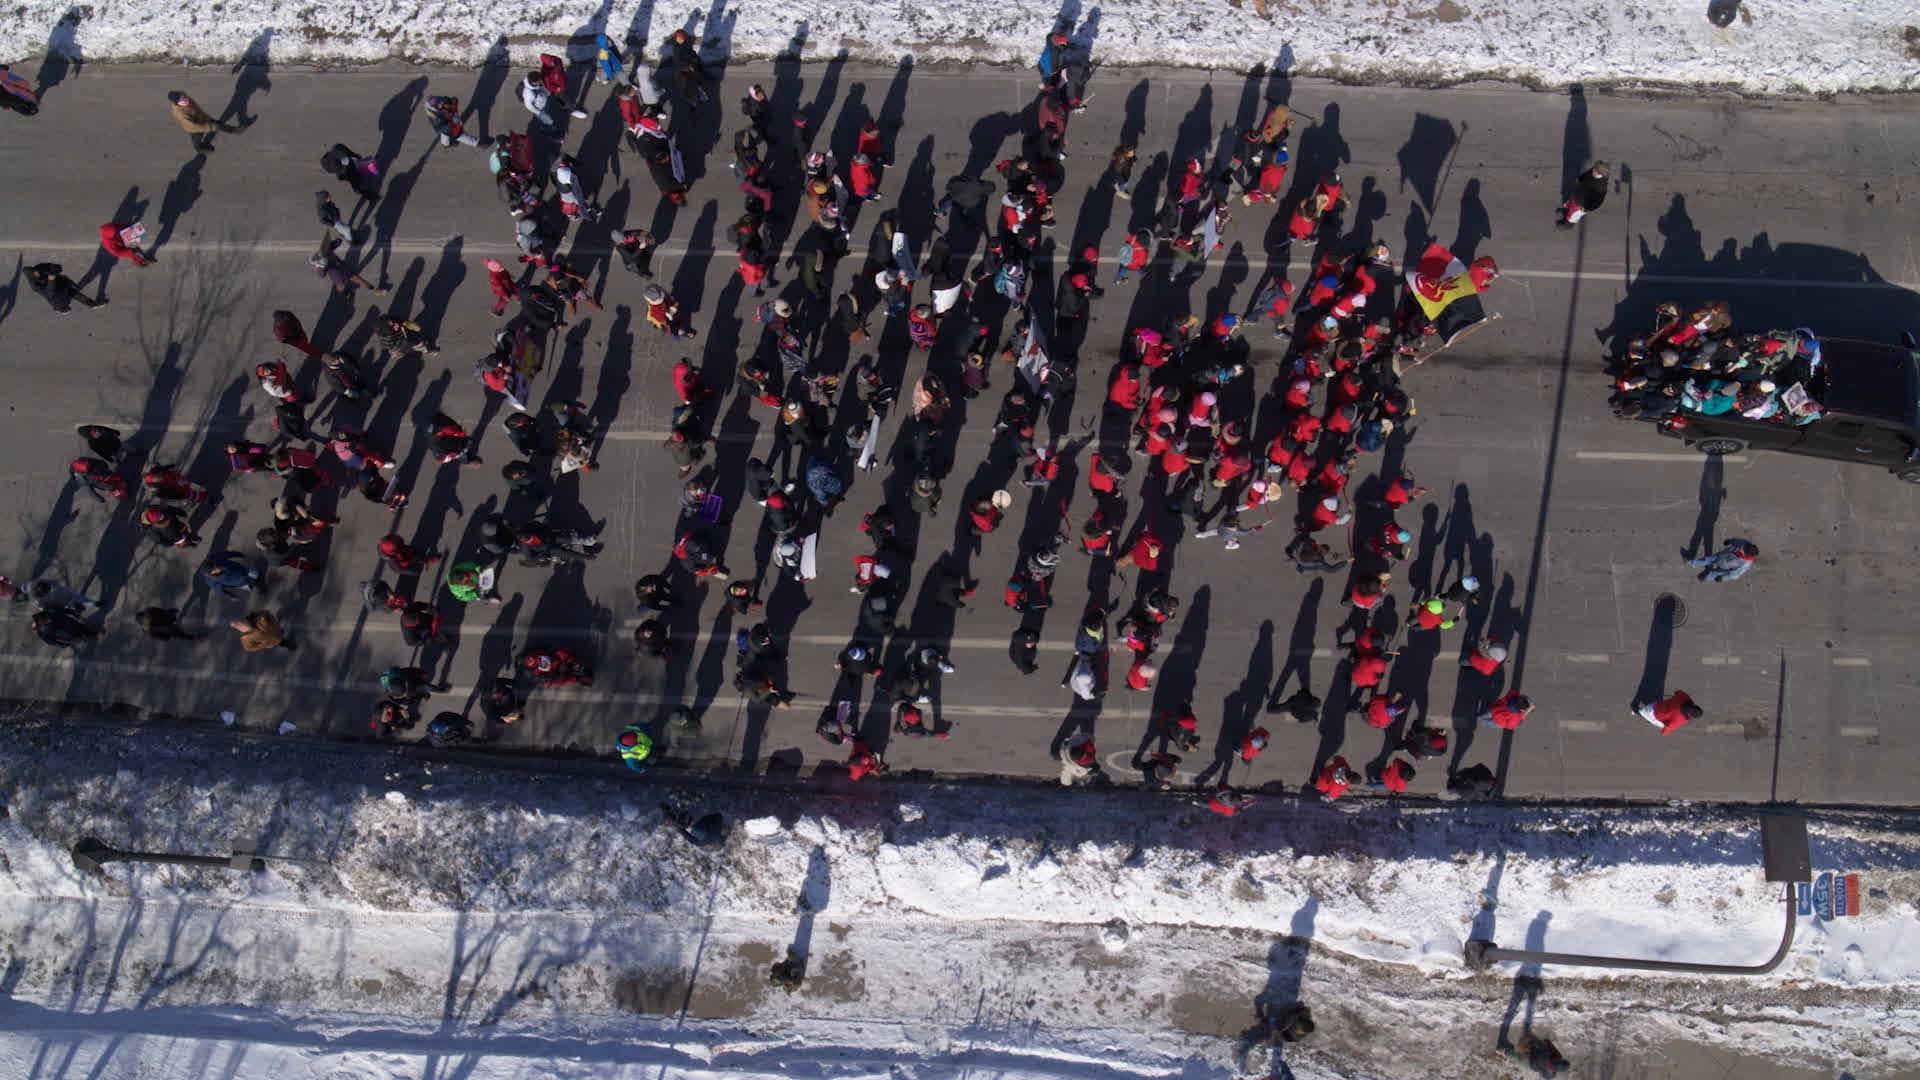 Overhead shot of 5th annual Missing and Murdered Indigenous Women March, Minneapolis, MN.